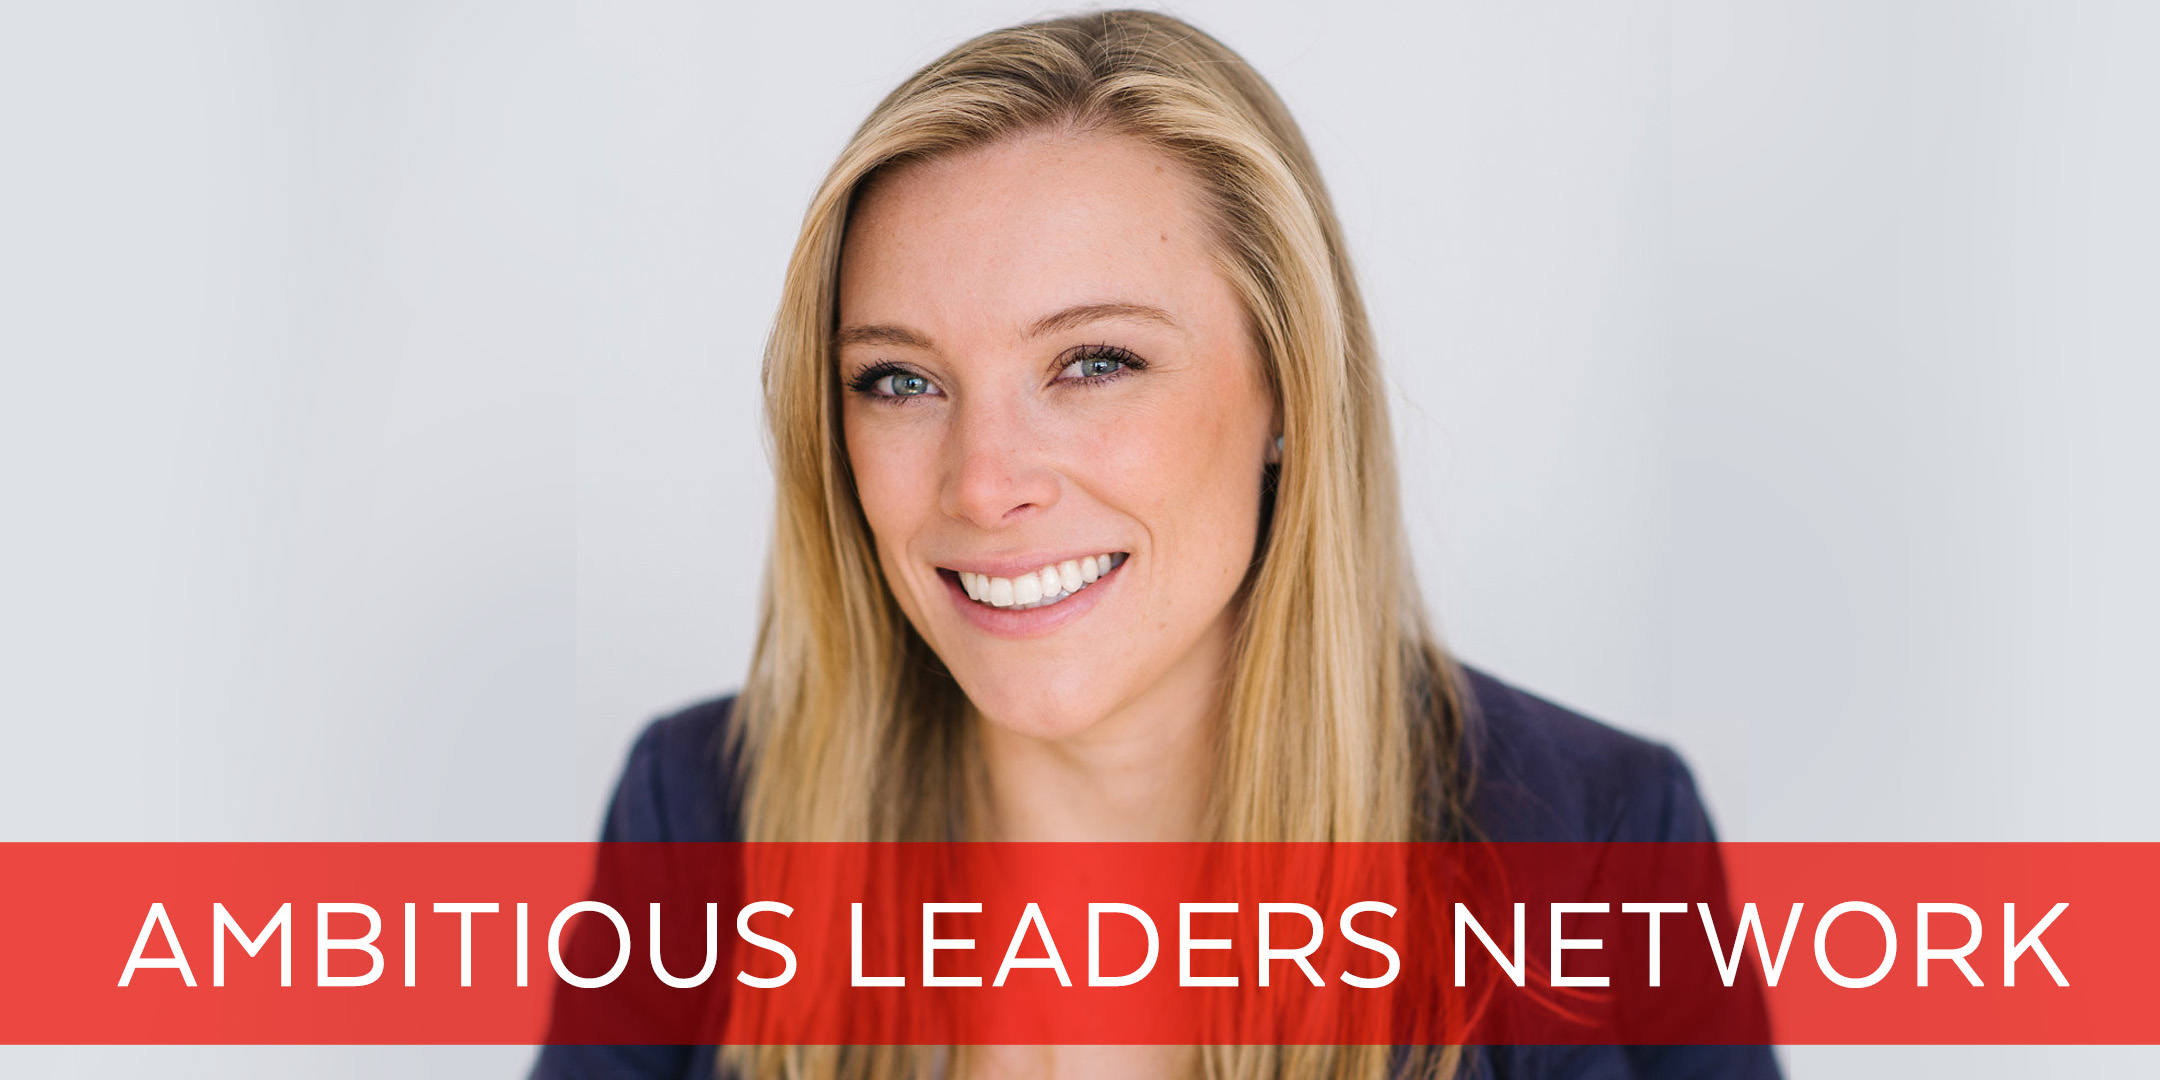 Ambitious Leaders Network - Tiffany Chown